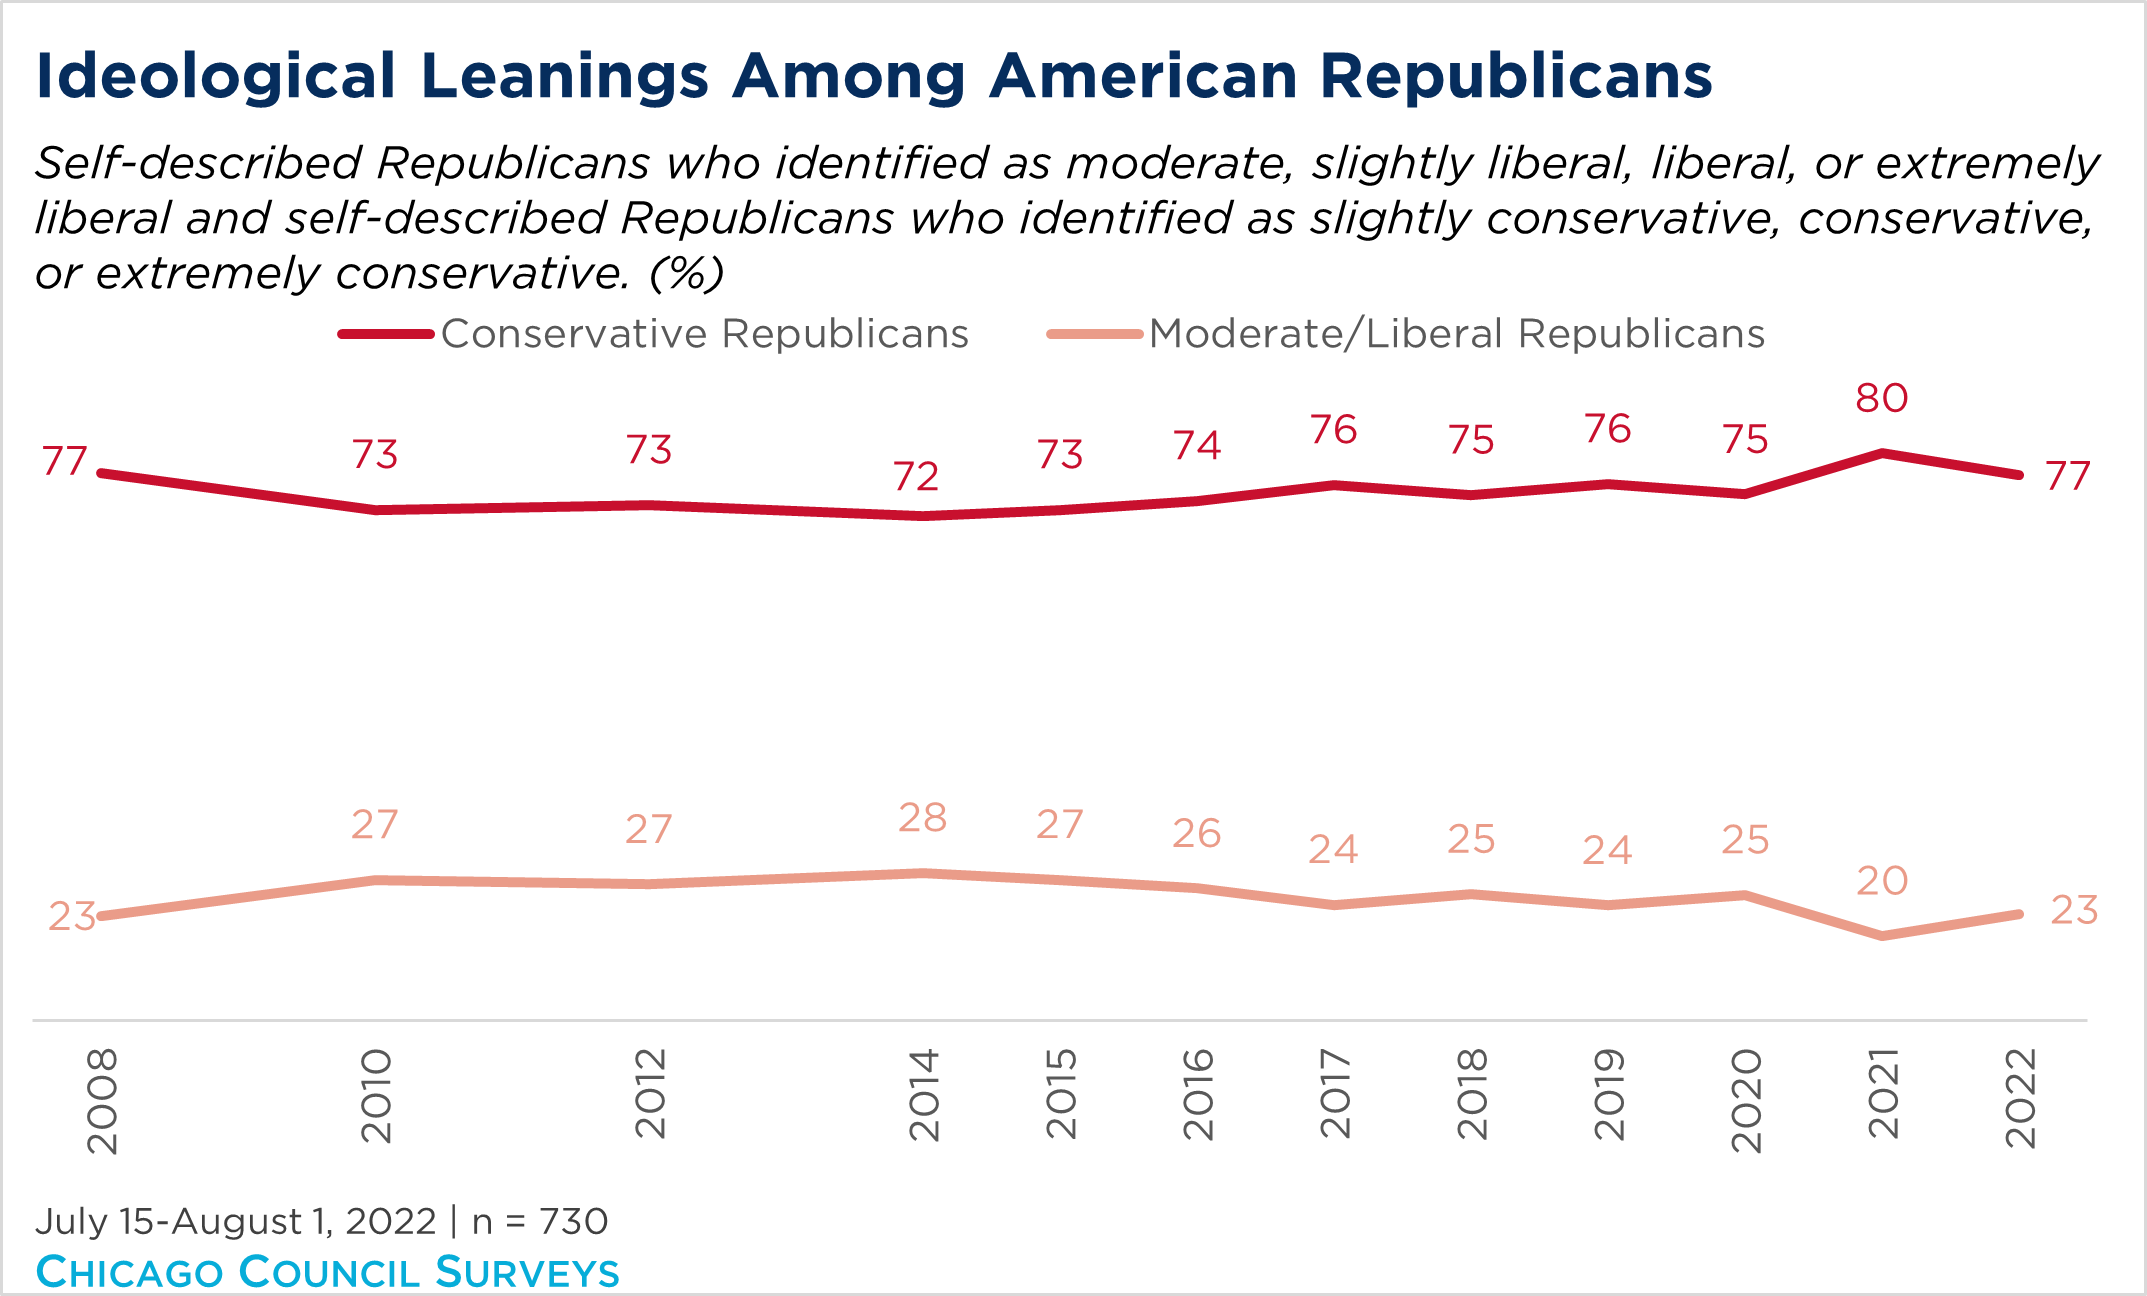 "line chart showing Republican ideological leanings over time"